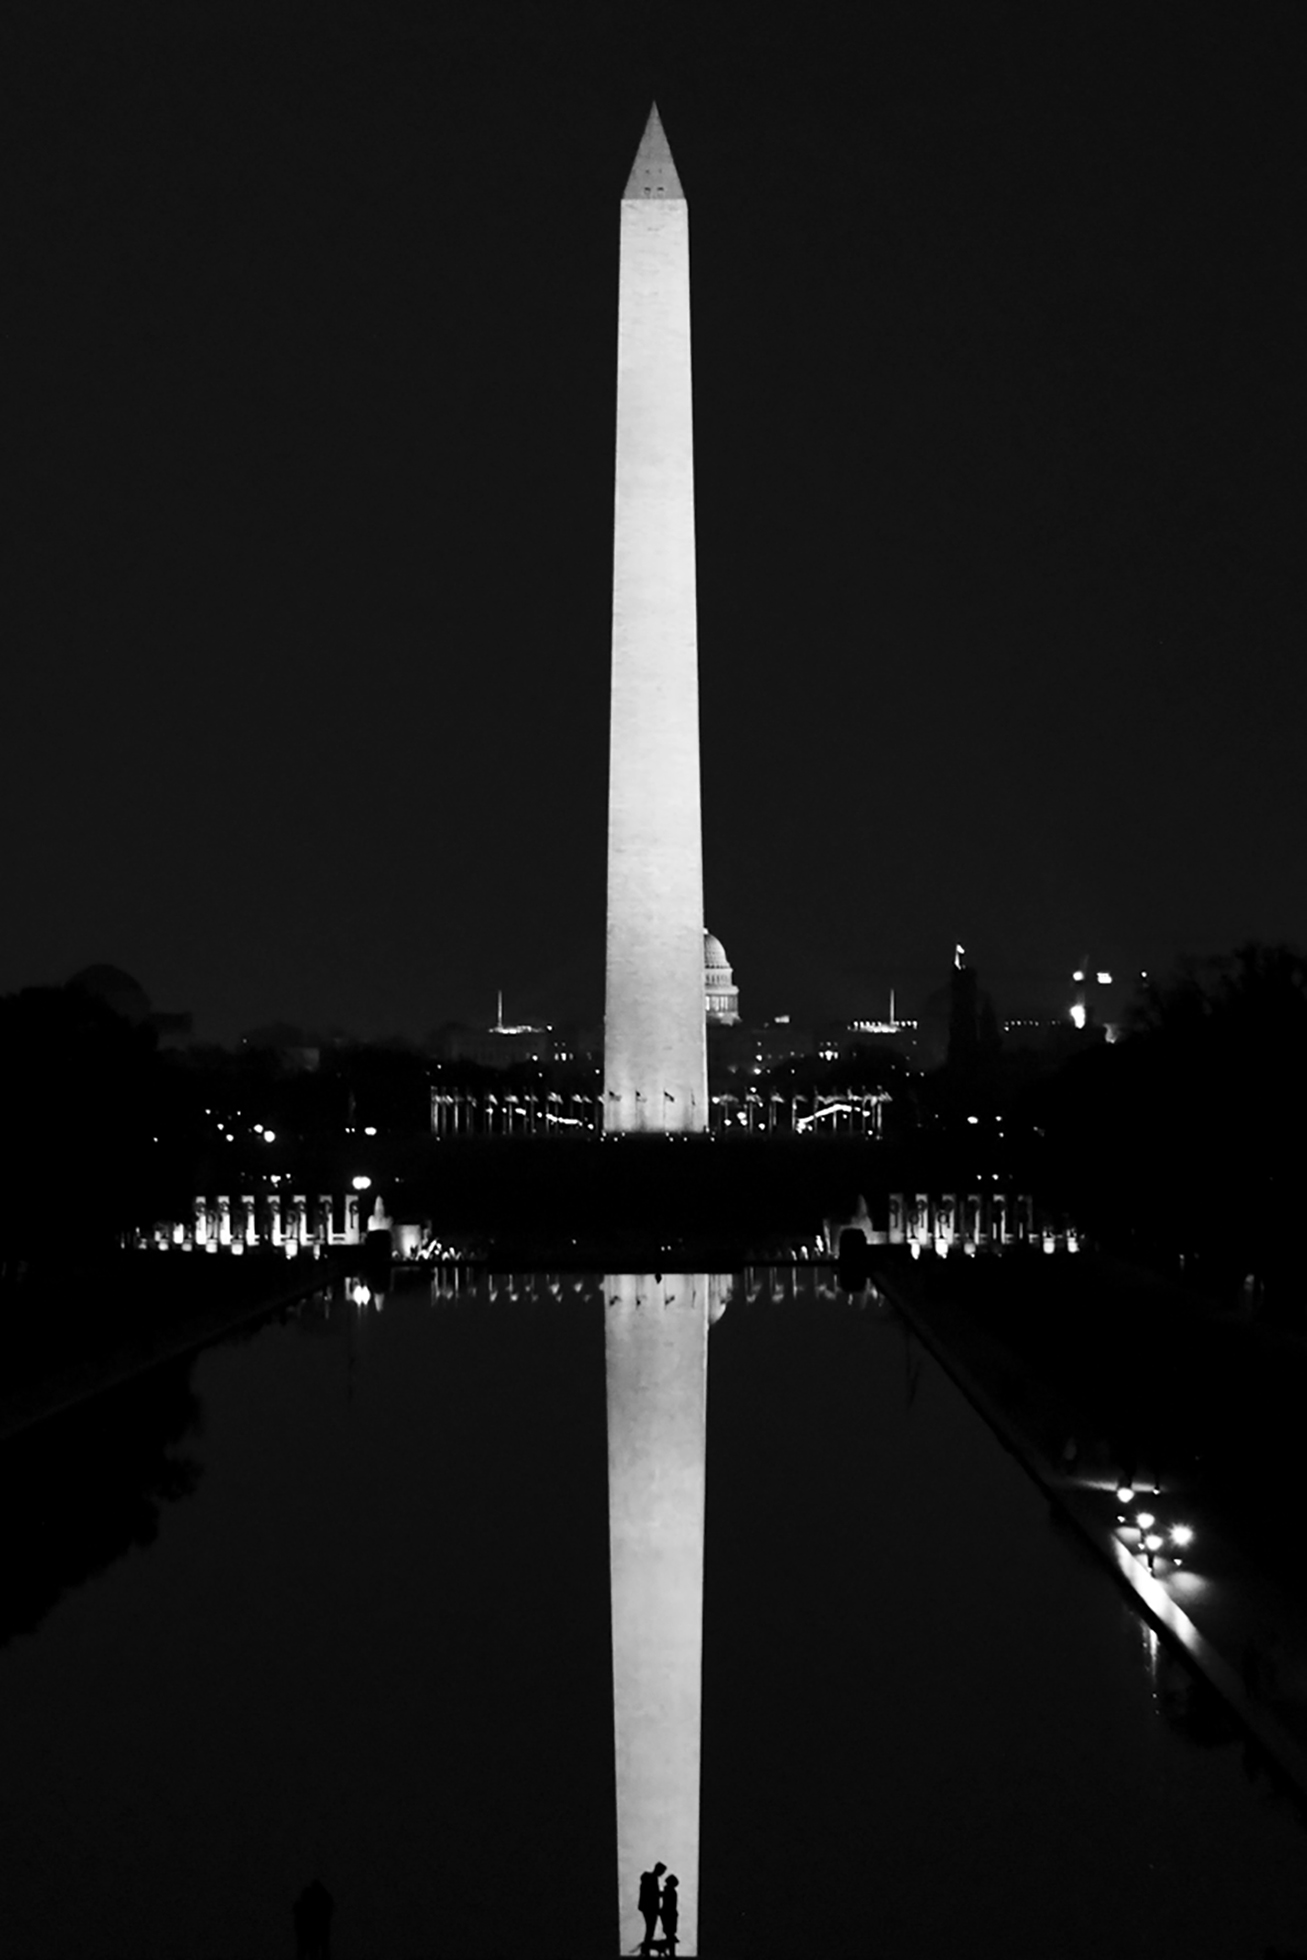 The Washington Monument at night. The image is black except for the monument itself, its long reflection to the bottom of the image, and lights of the city in the middle. At the bottom in the reflection, two silhouettes stand together.